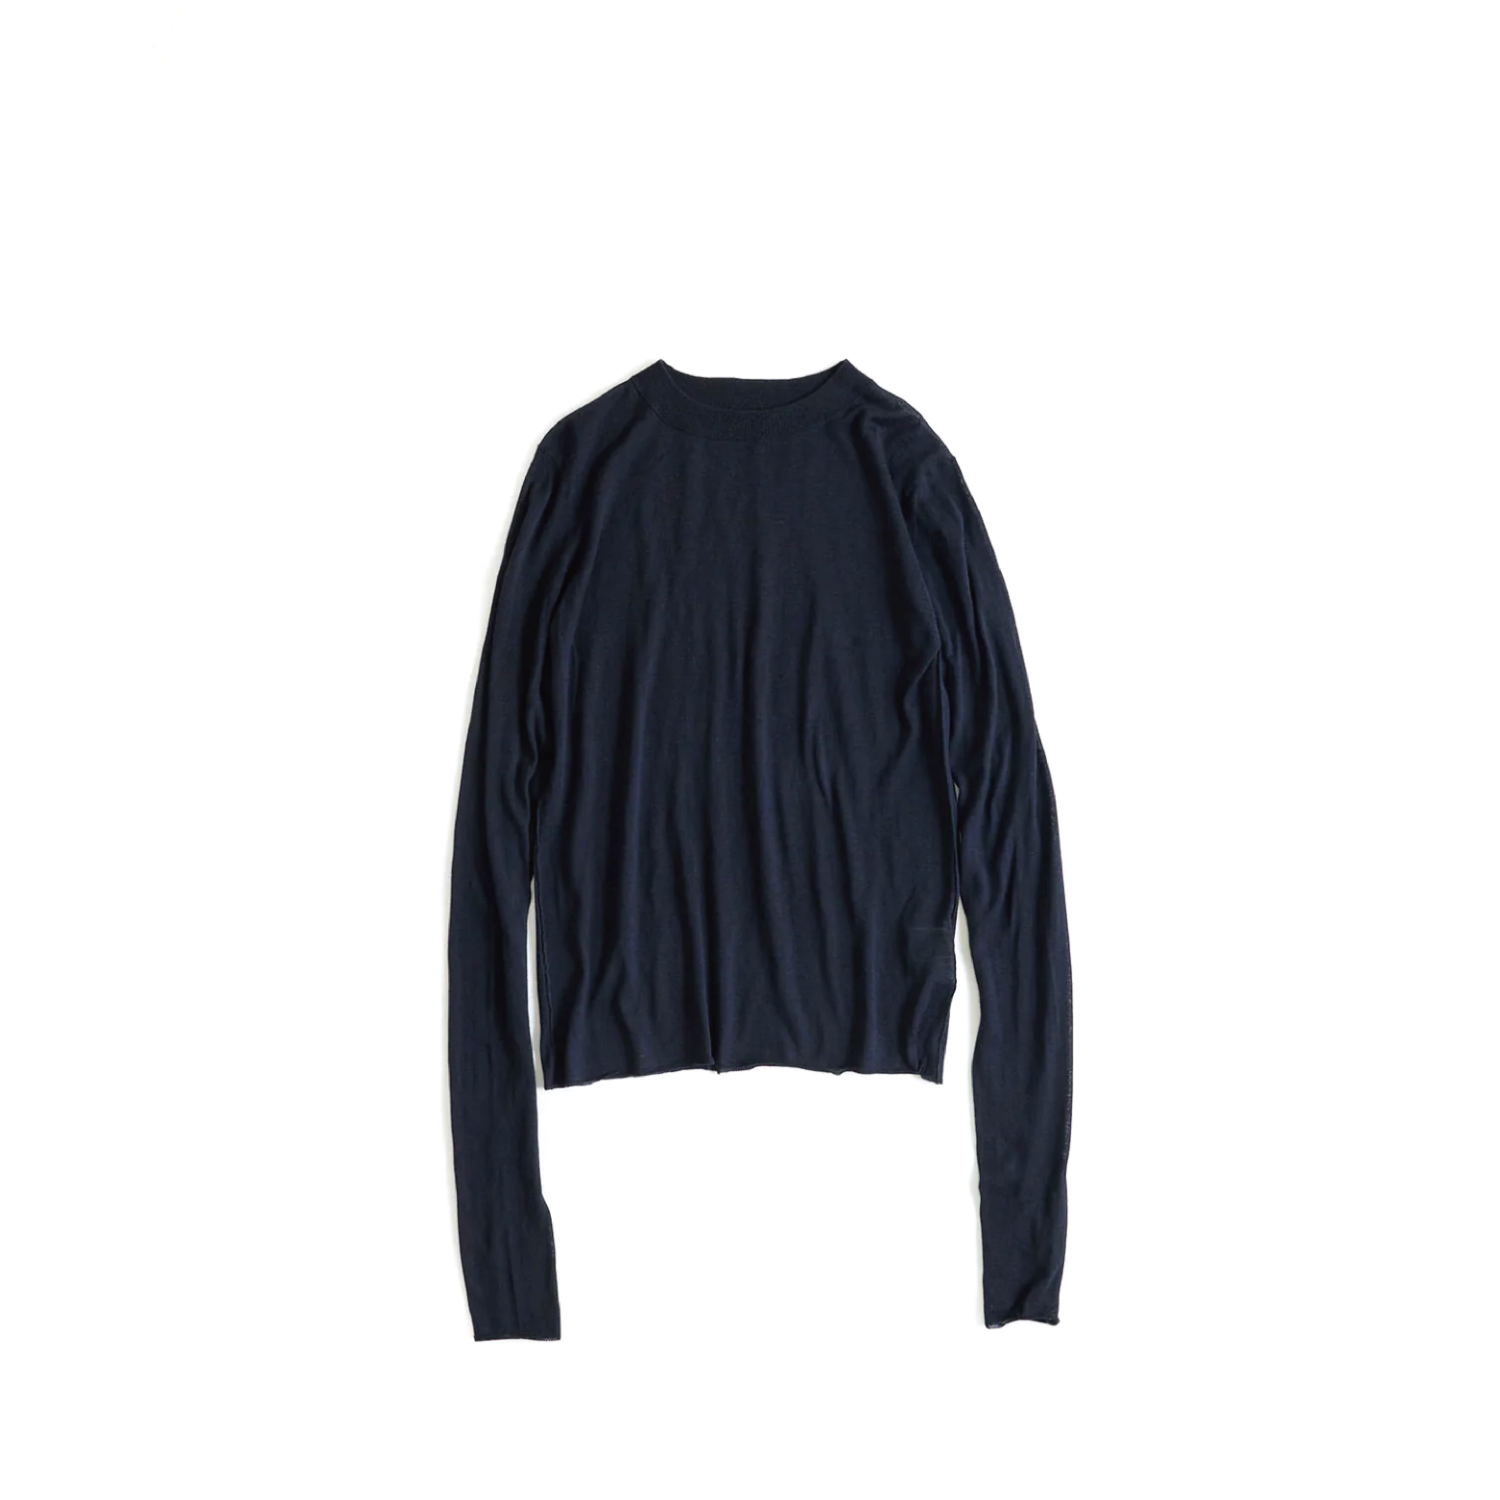 ﻿Cotton Cashmere Sheer Knit - Navy